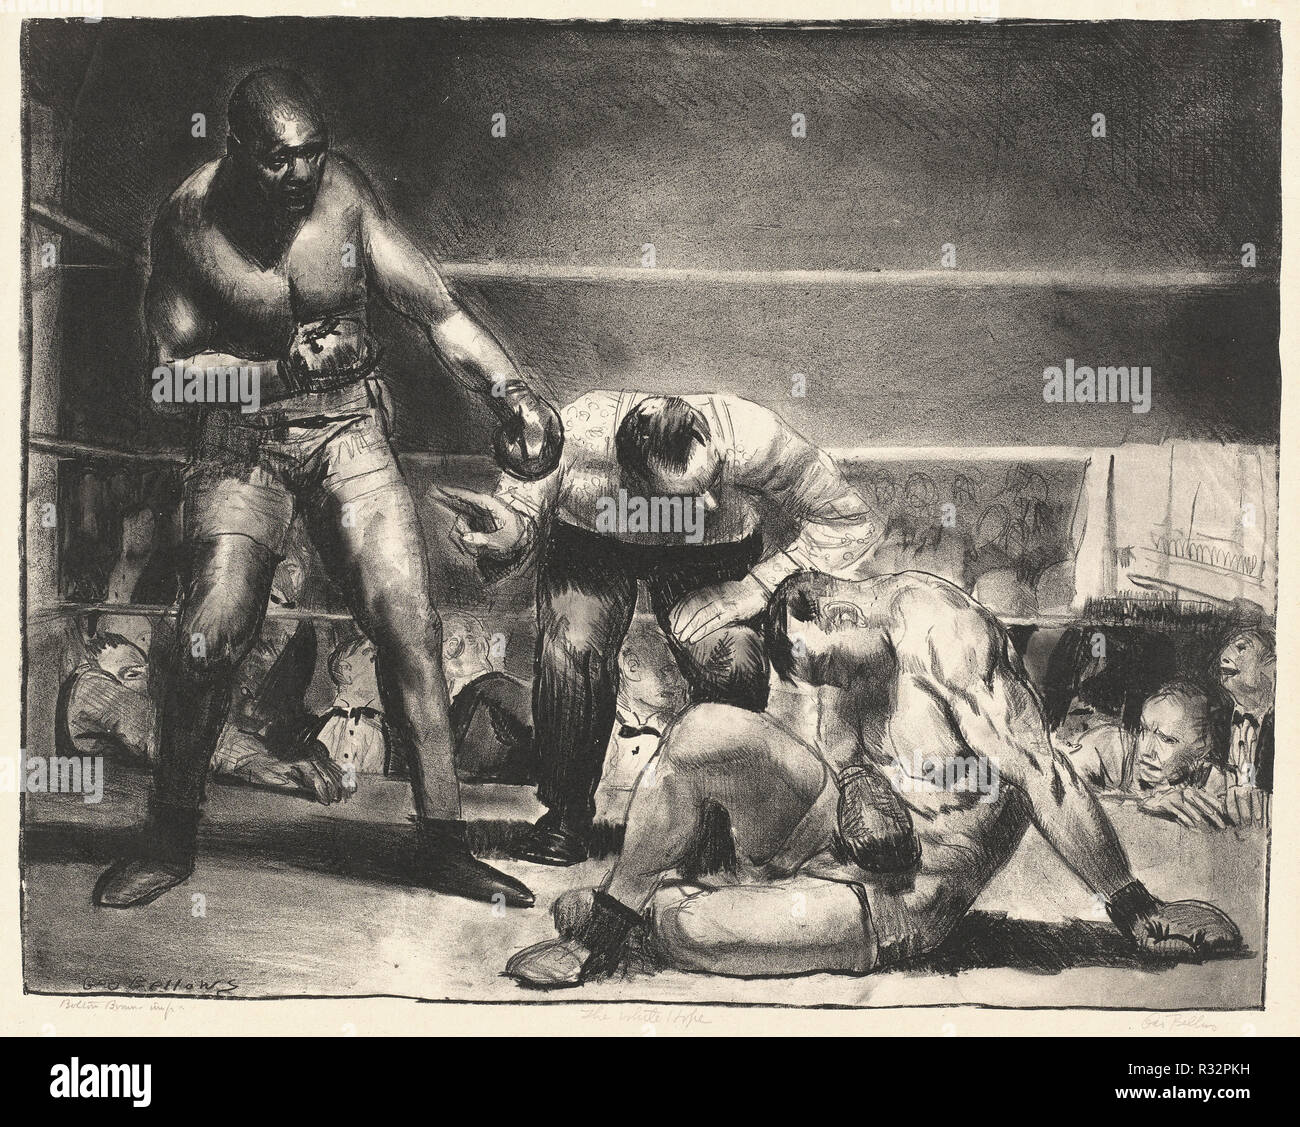 The White Hope. Dated: 1921. Dimensions: image: 36.83 × 47.63 cm (14 1/2 × 18 3/4 in.). Medium: lithograph in black. Museum: National Gallery of Art, Washington DC. Author: George Bellows. Stock Photo